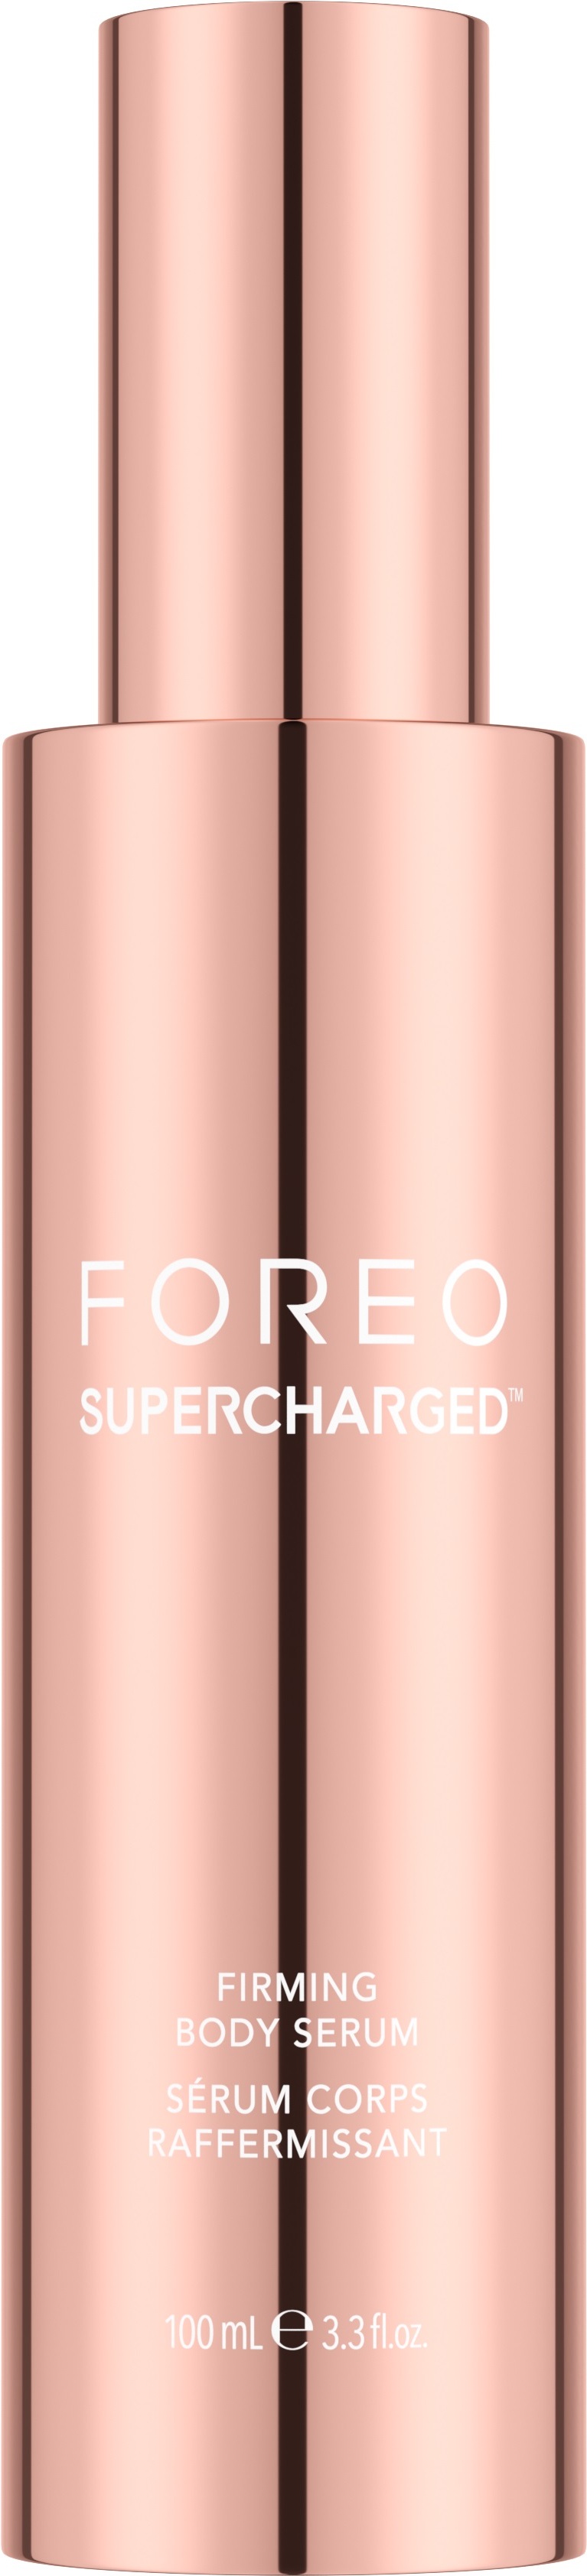 FOREO SUPERCHARGED Firming Body Serum 100 ml